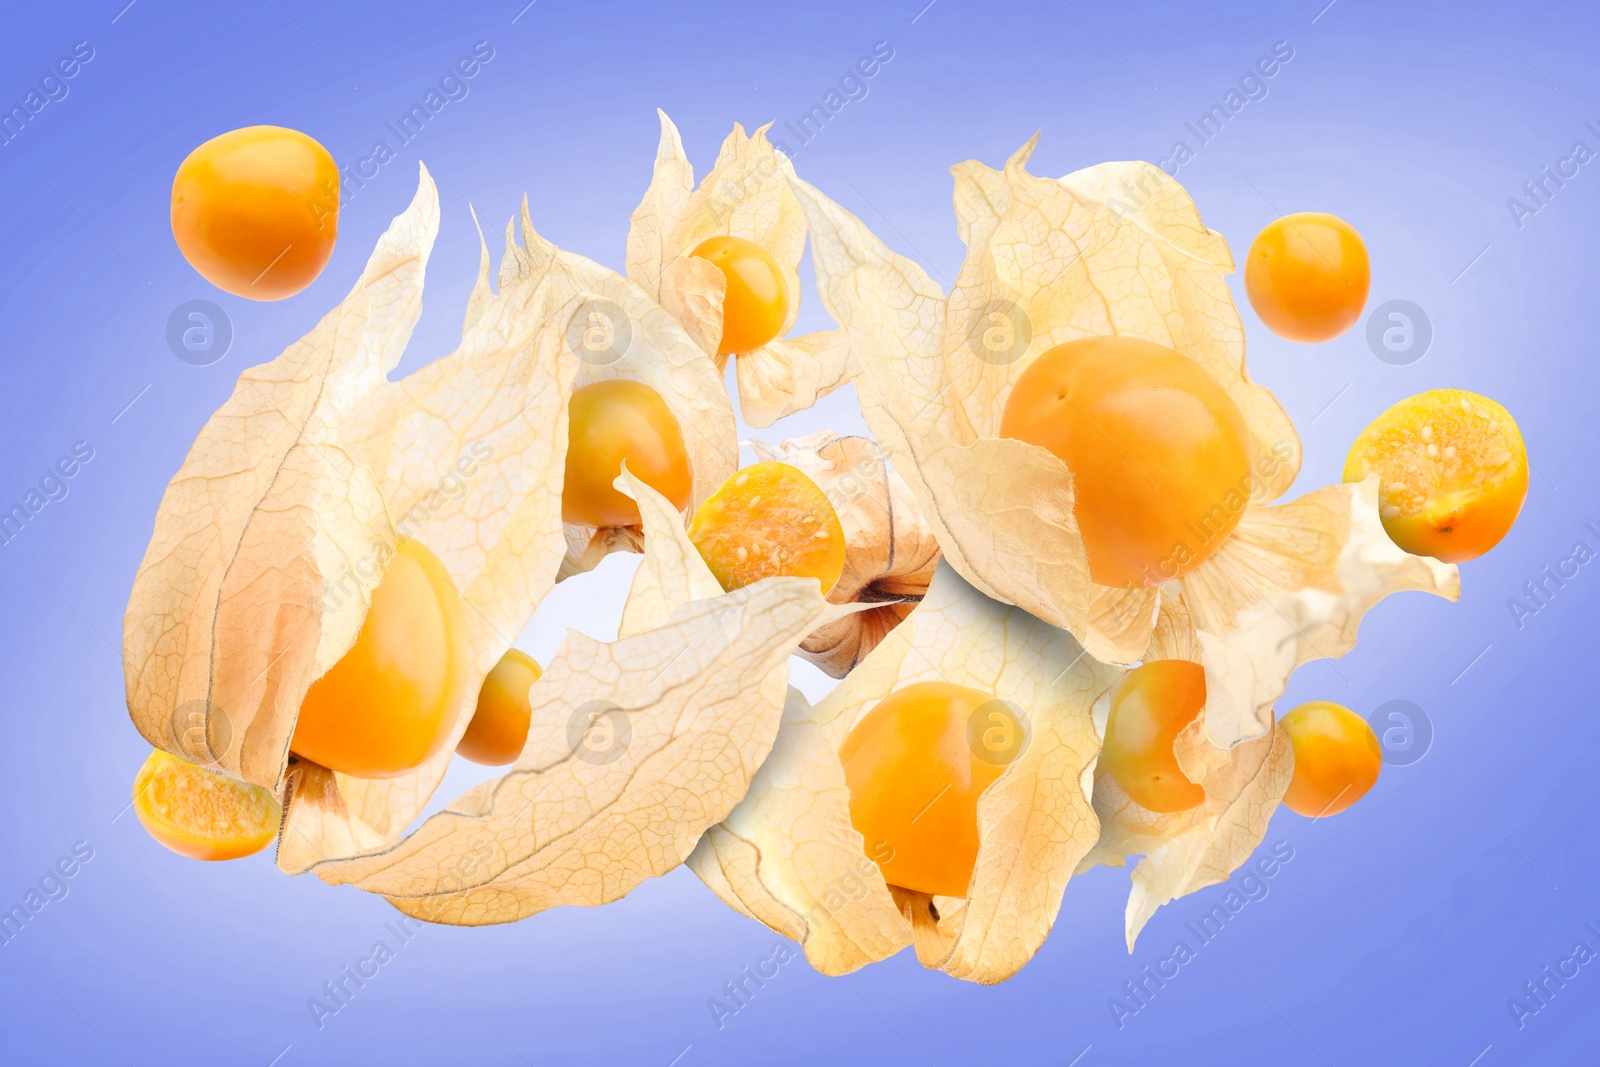 Image of Ripe orange physalis fruits with calyx falling on color gradient background